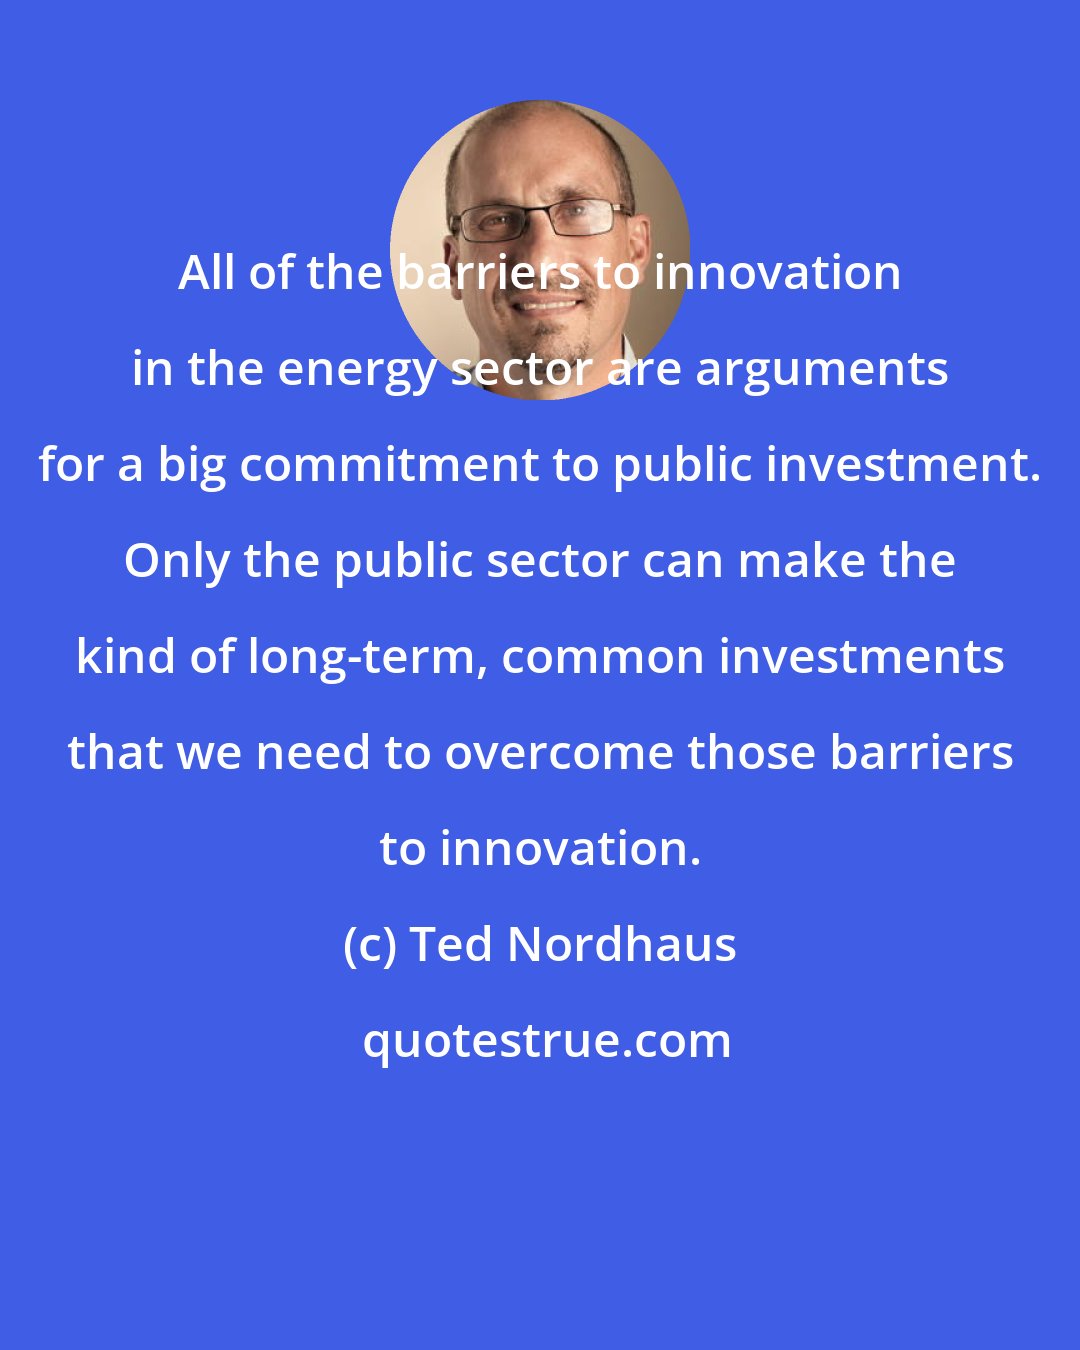 Ted Nordhaus: All of the barriers to innovation in the energy sector are arguments for a big commitment to public investment. Only the public sector can make the kind of long-term, common investments that we need to overcome those barriers to innovation.